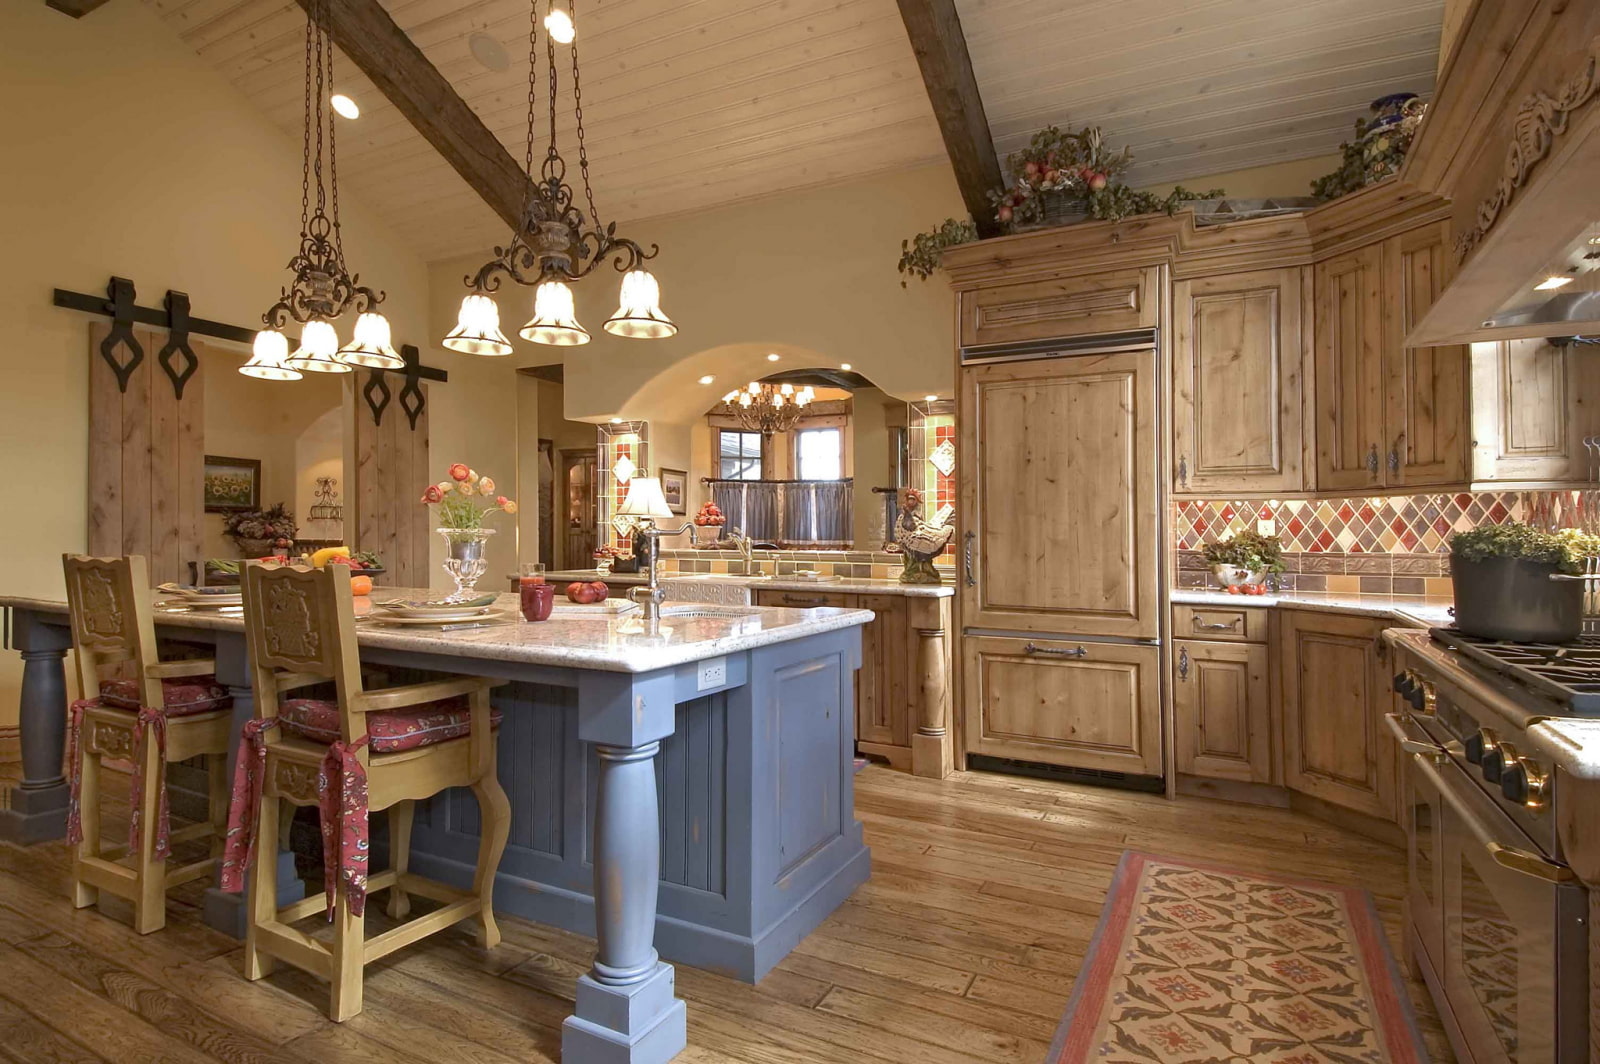 Kitchen in country style2